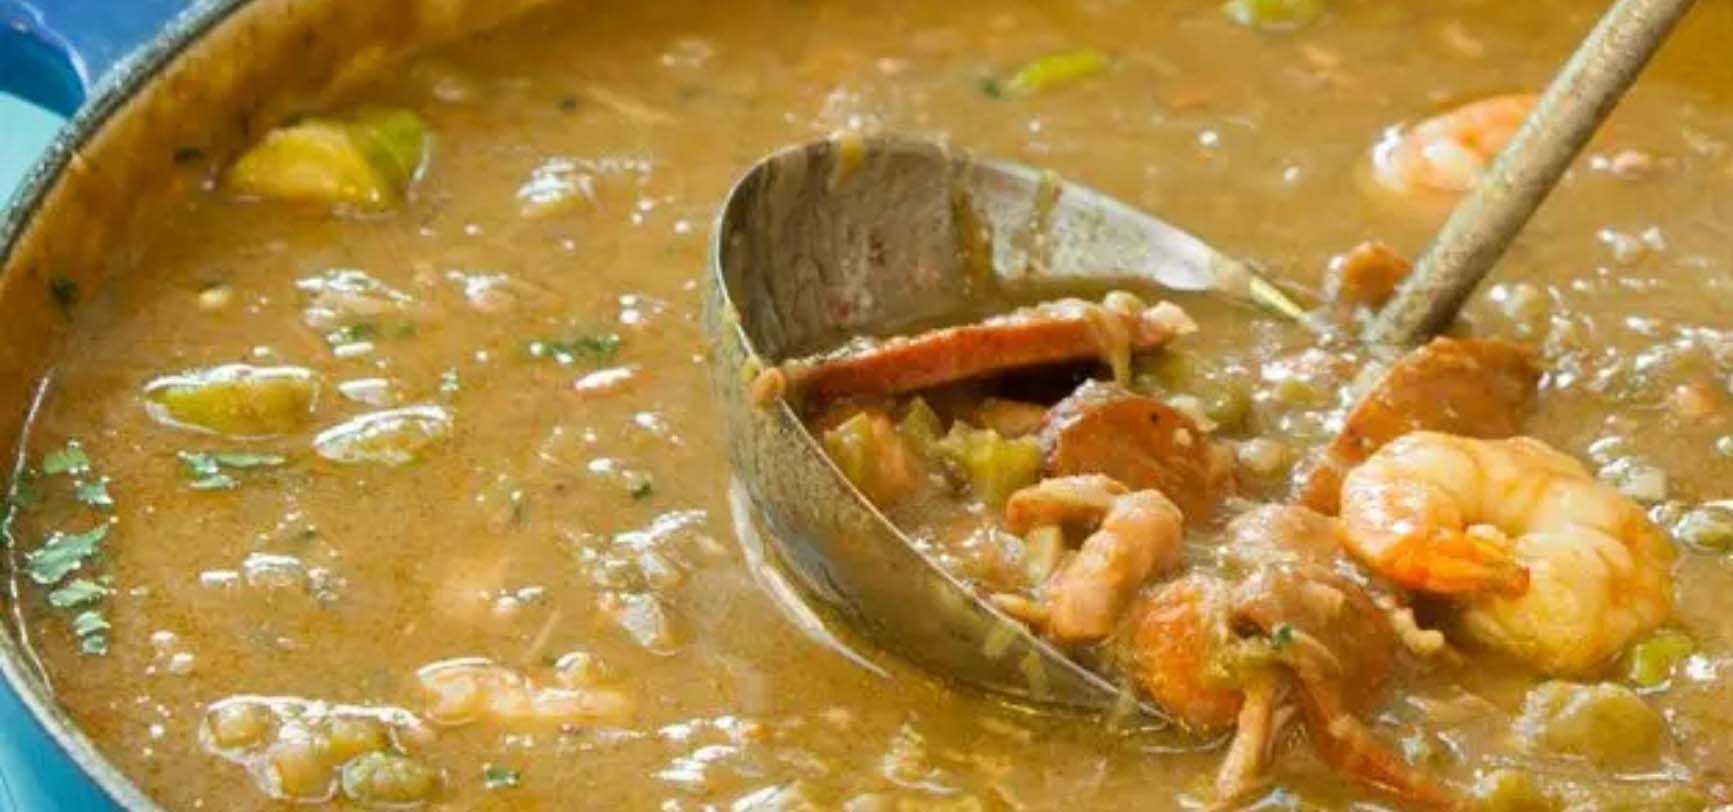 Ladle spooning a serving from a pot of Étouffée.